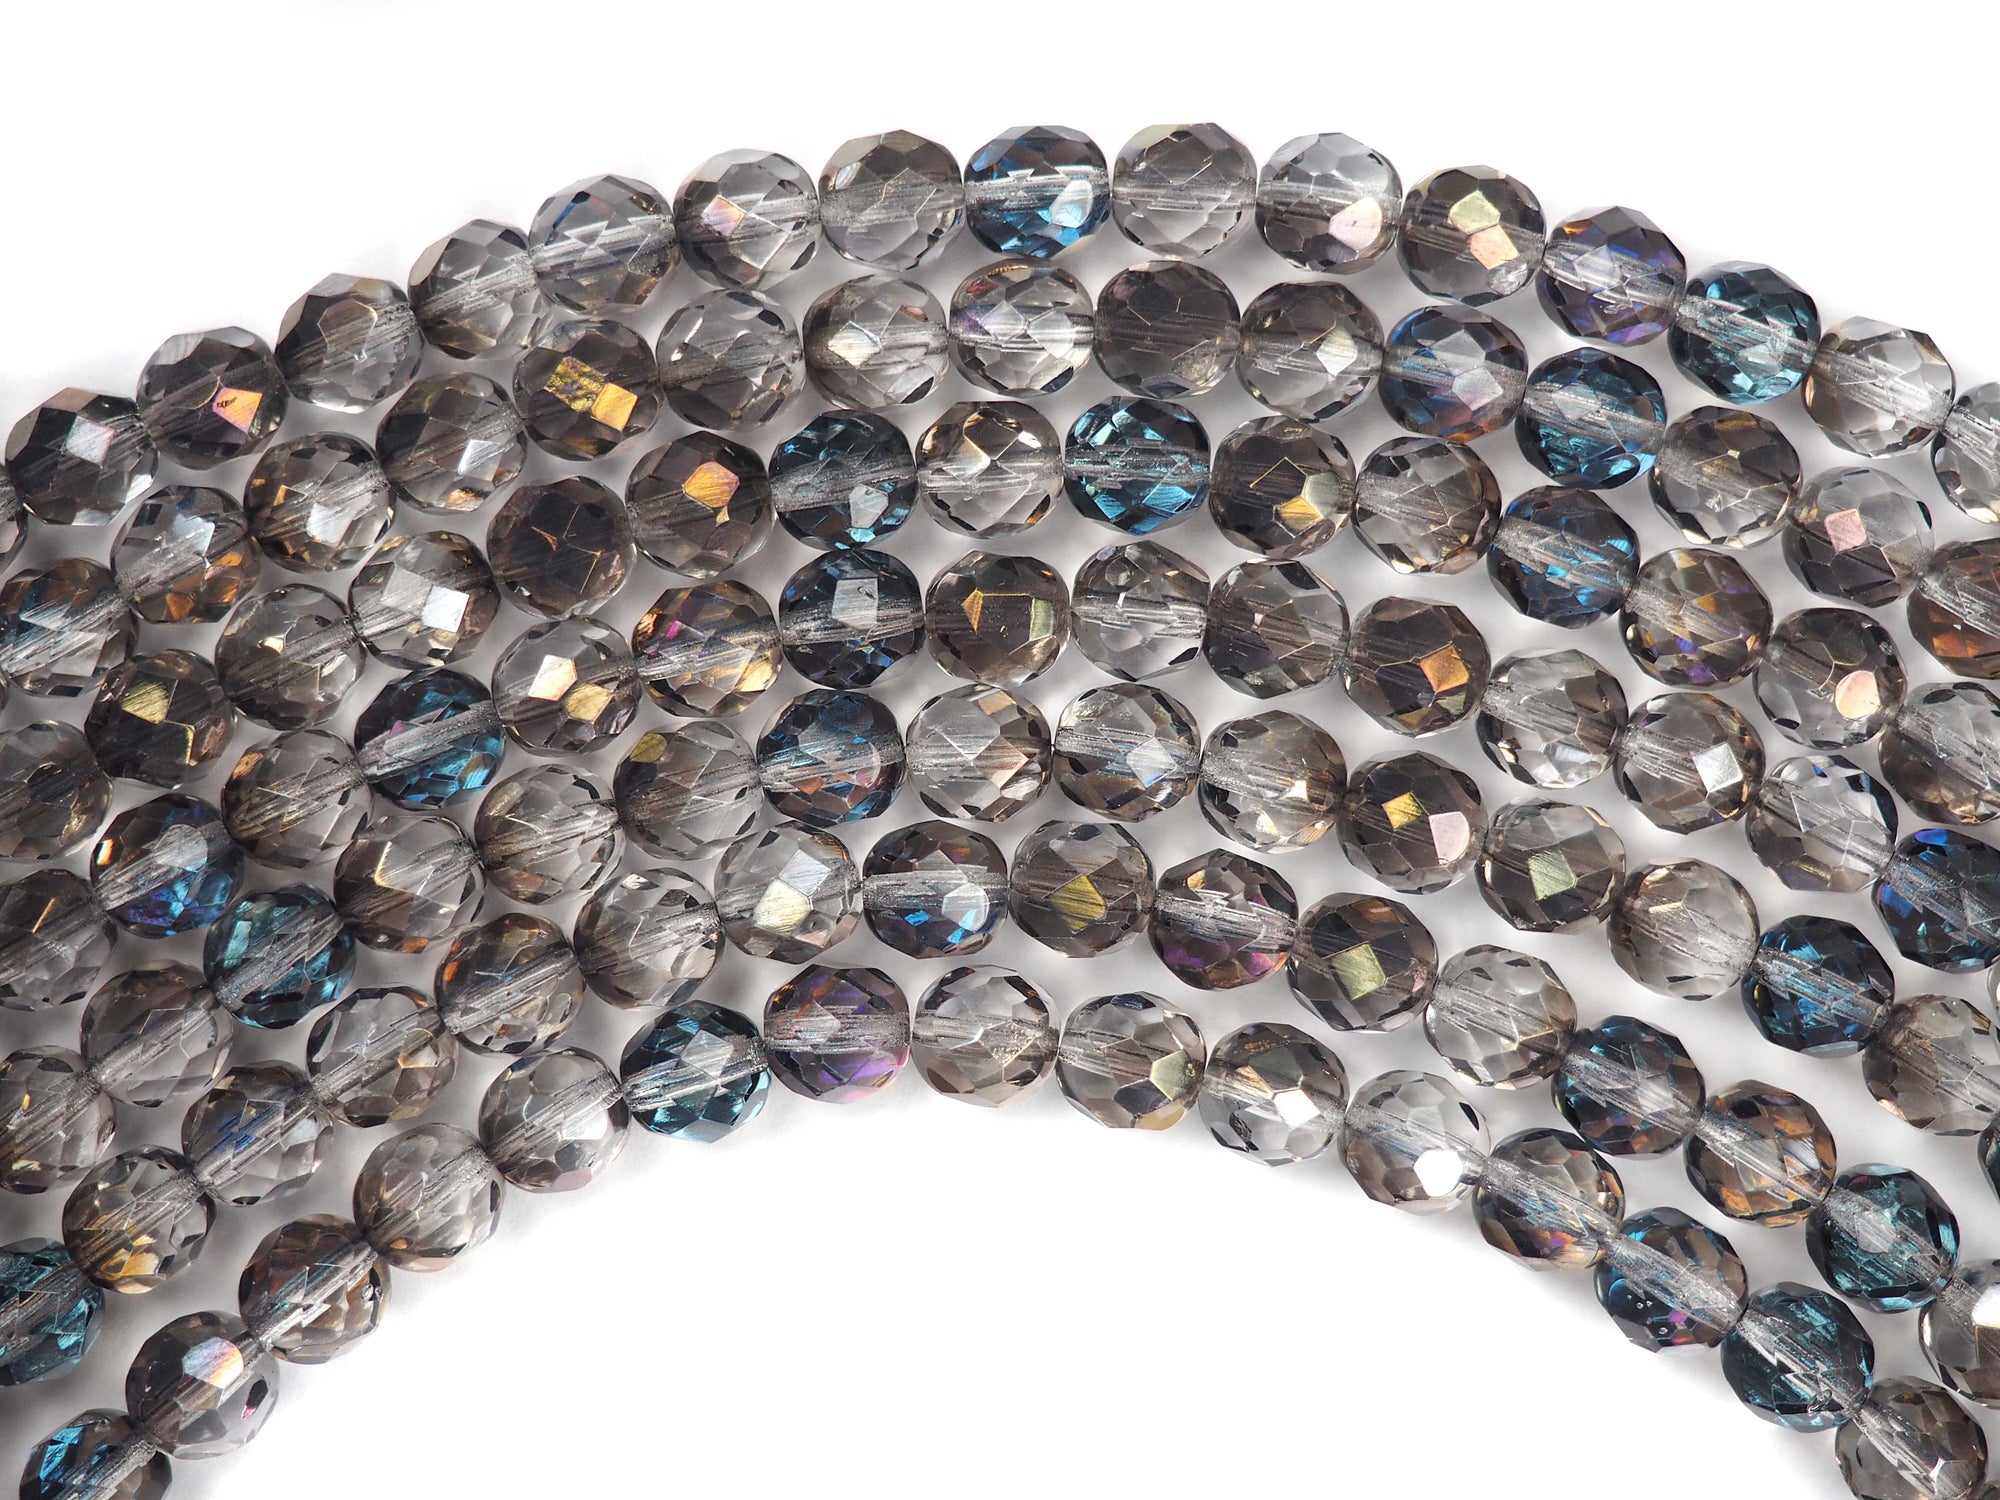 Crystal Blue Valentinite Half coated, Czech Fire Polished Round Faceted Glass Beads, 16 inches 8mm 51 pieces